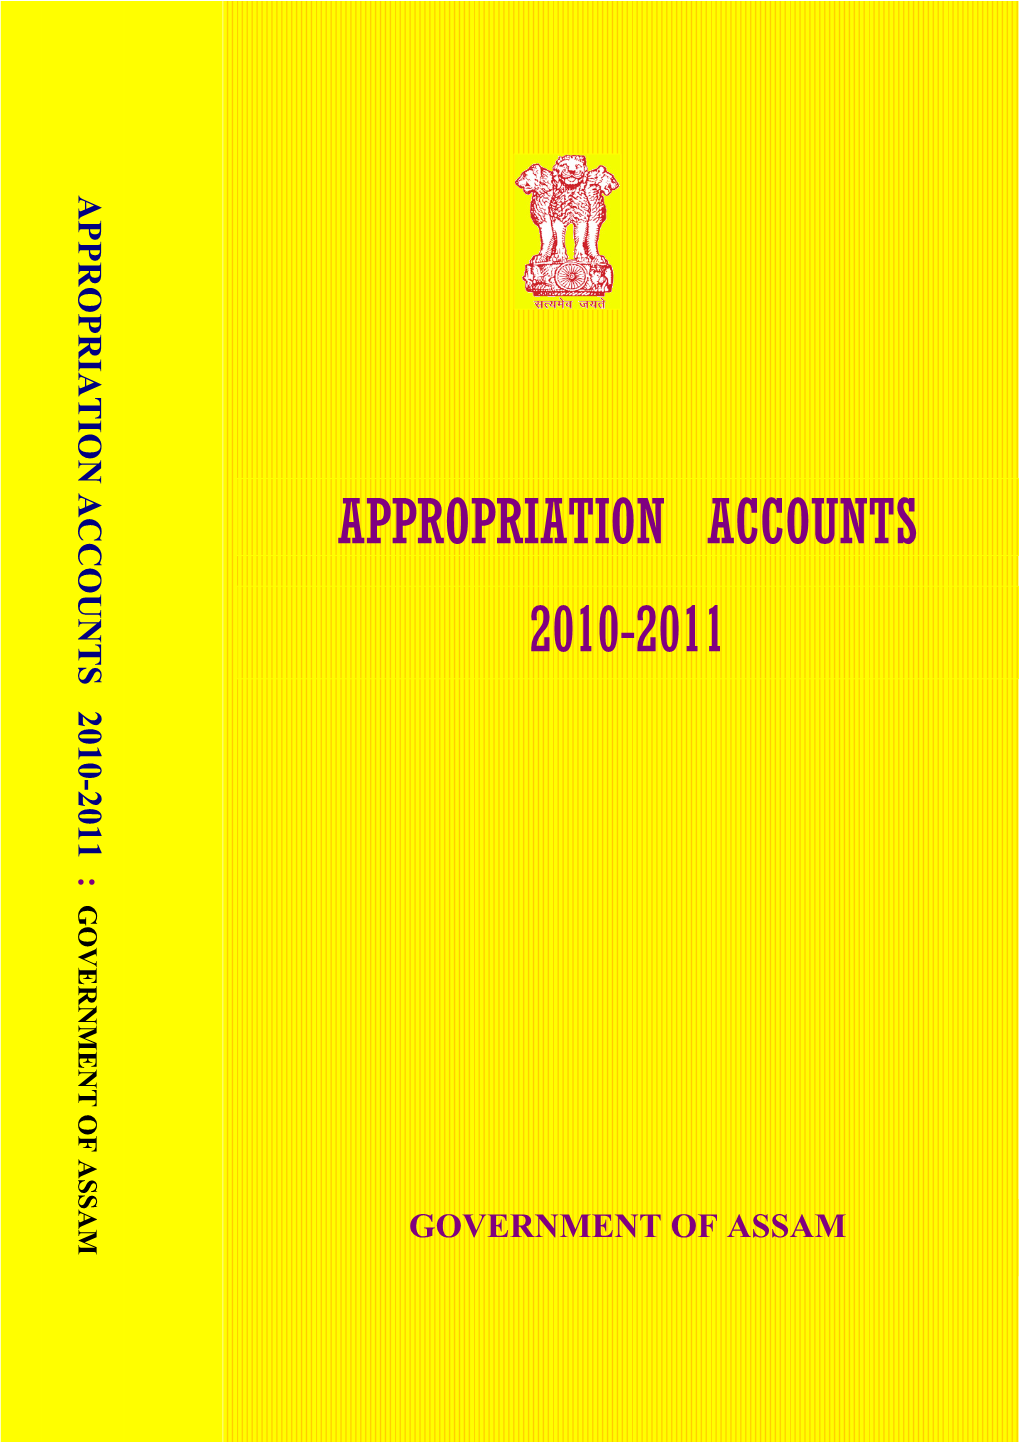 2010-2011 Appropriation Accounts